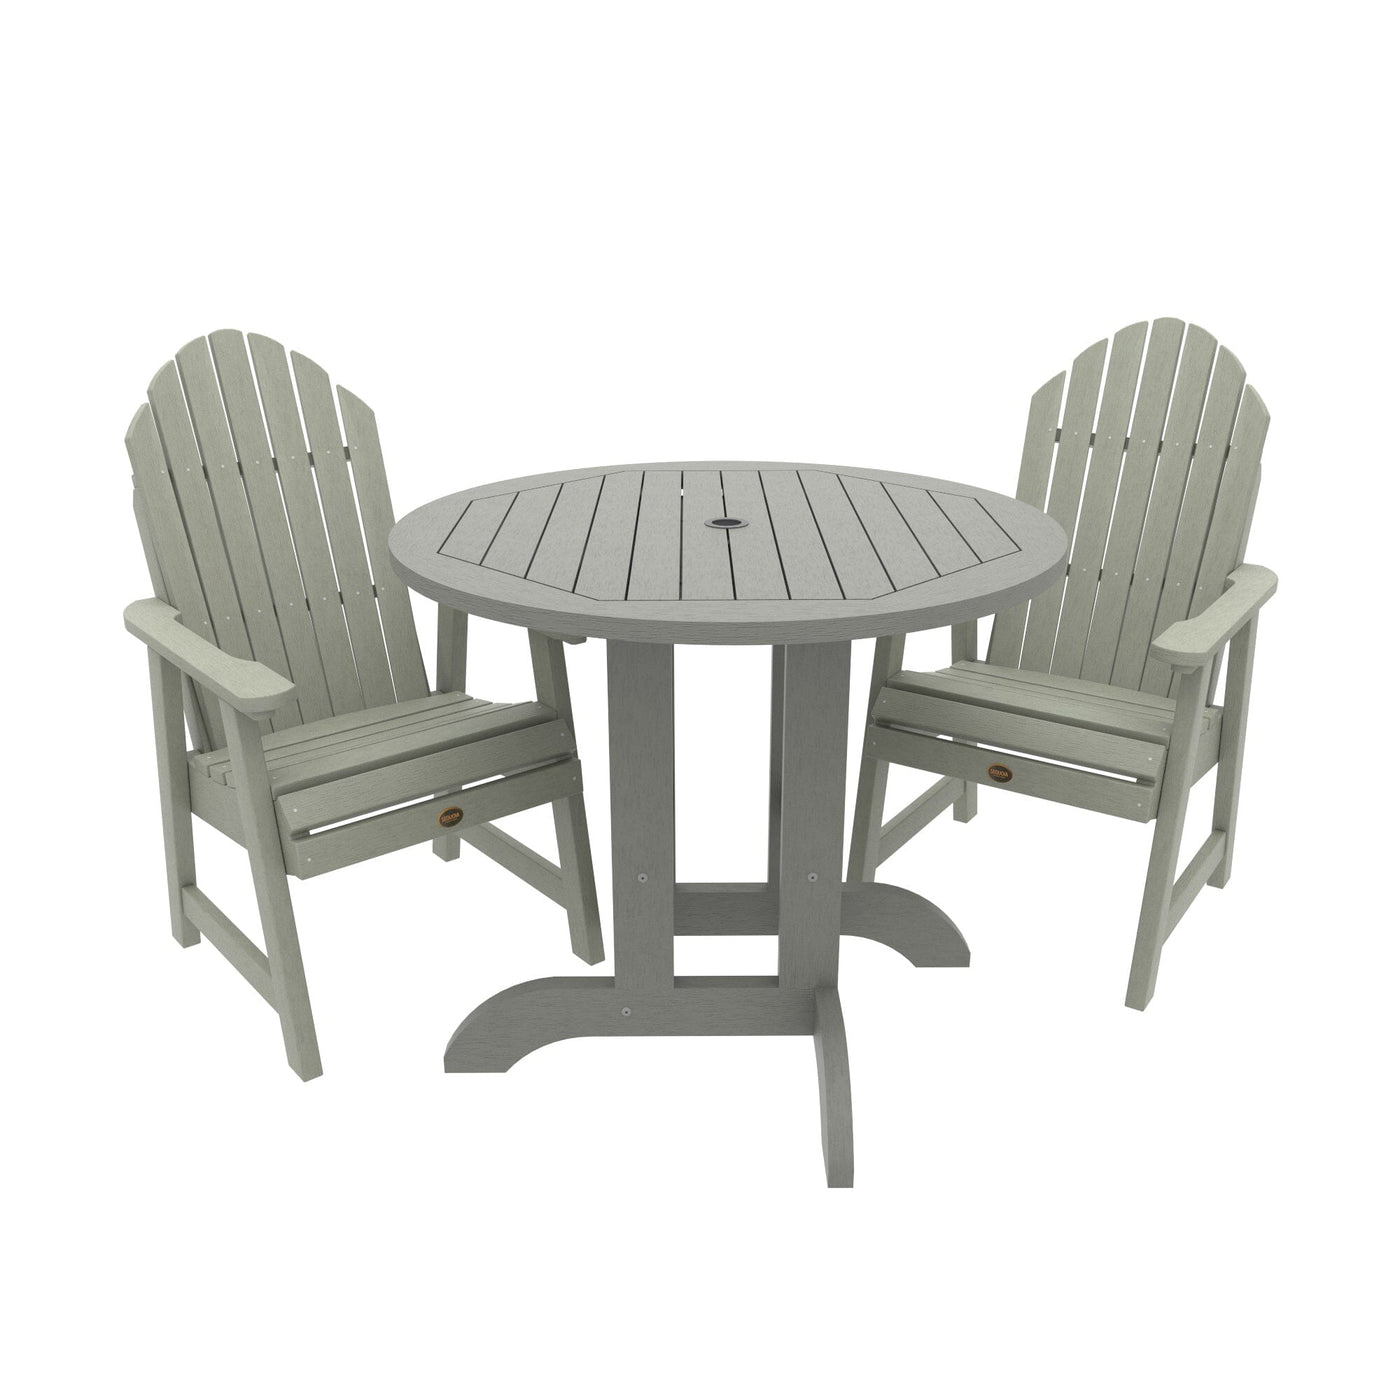 Commercial Grade 3 Pc Muskoka Adirondack Bistro Dining Set with 36” Table Kitted Sets Sequoia Professional Eucalyptus 